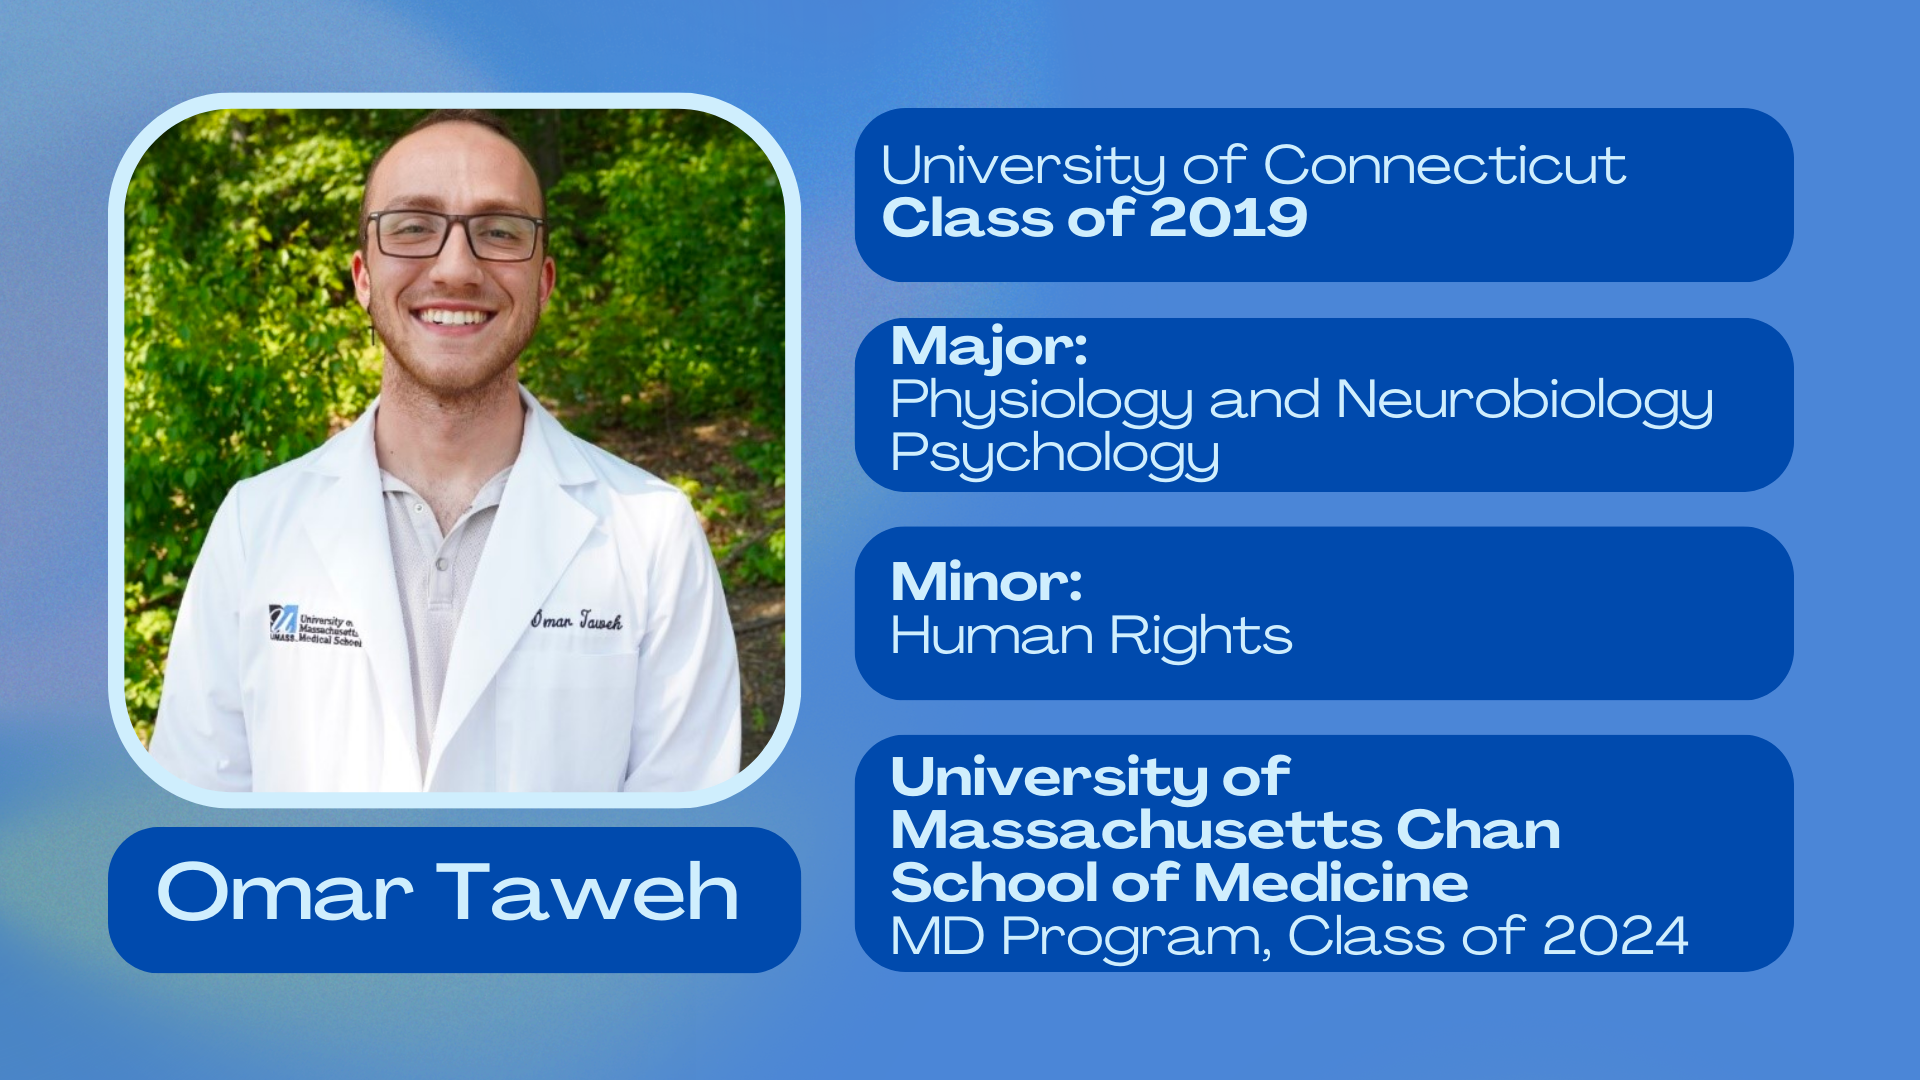 Omar Taweh; University of Connecticut class of 2019; Major: Physiology and neurobiology, Psychology; Minor: HUman rights; University of Massachusetts Chan School of Medicine MD program class of 2024